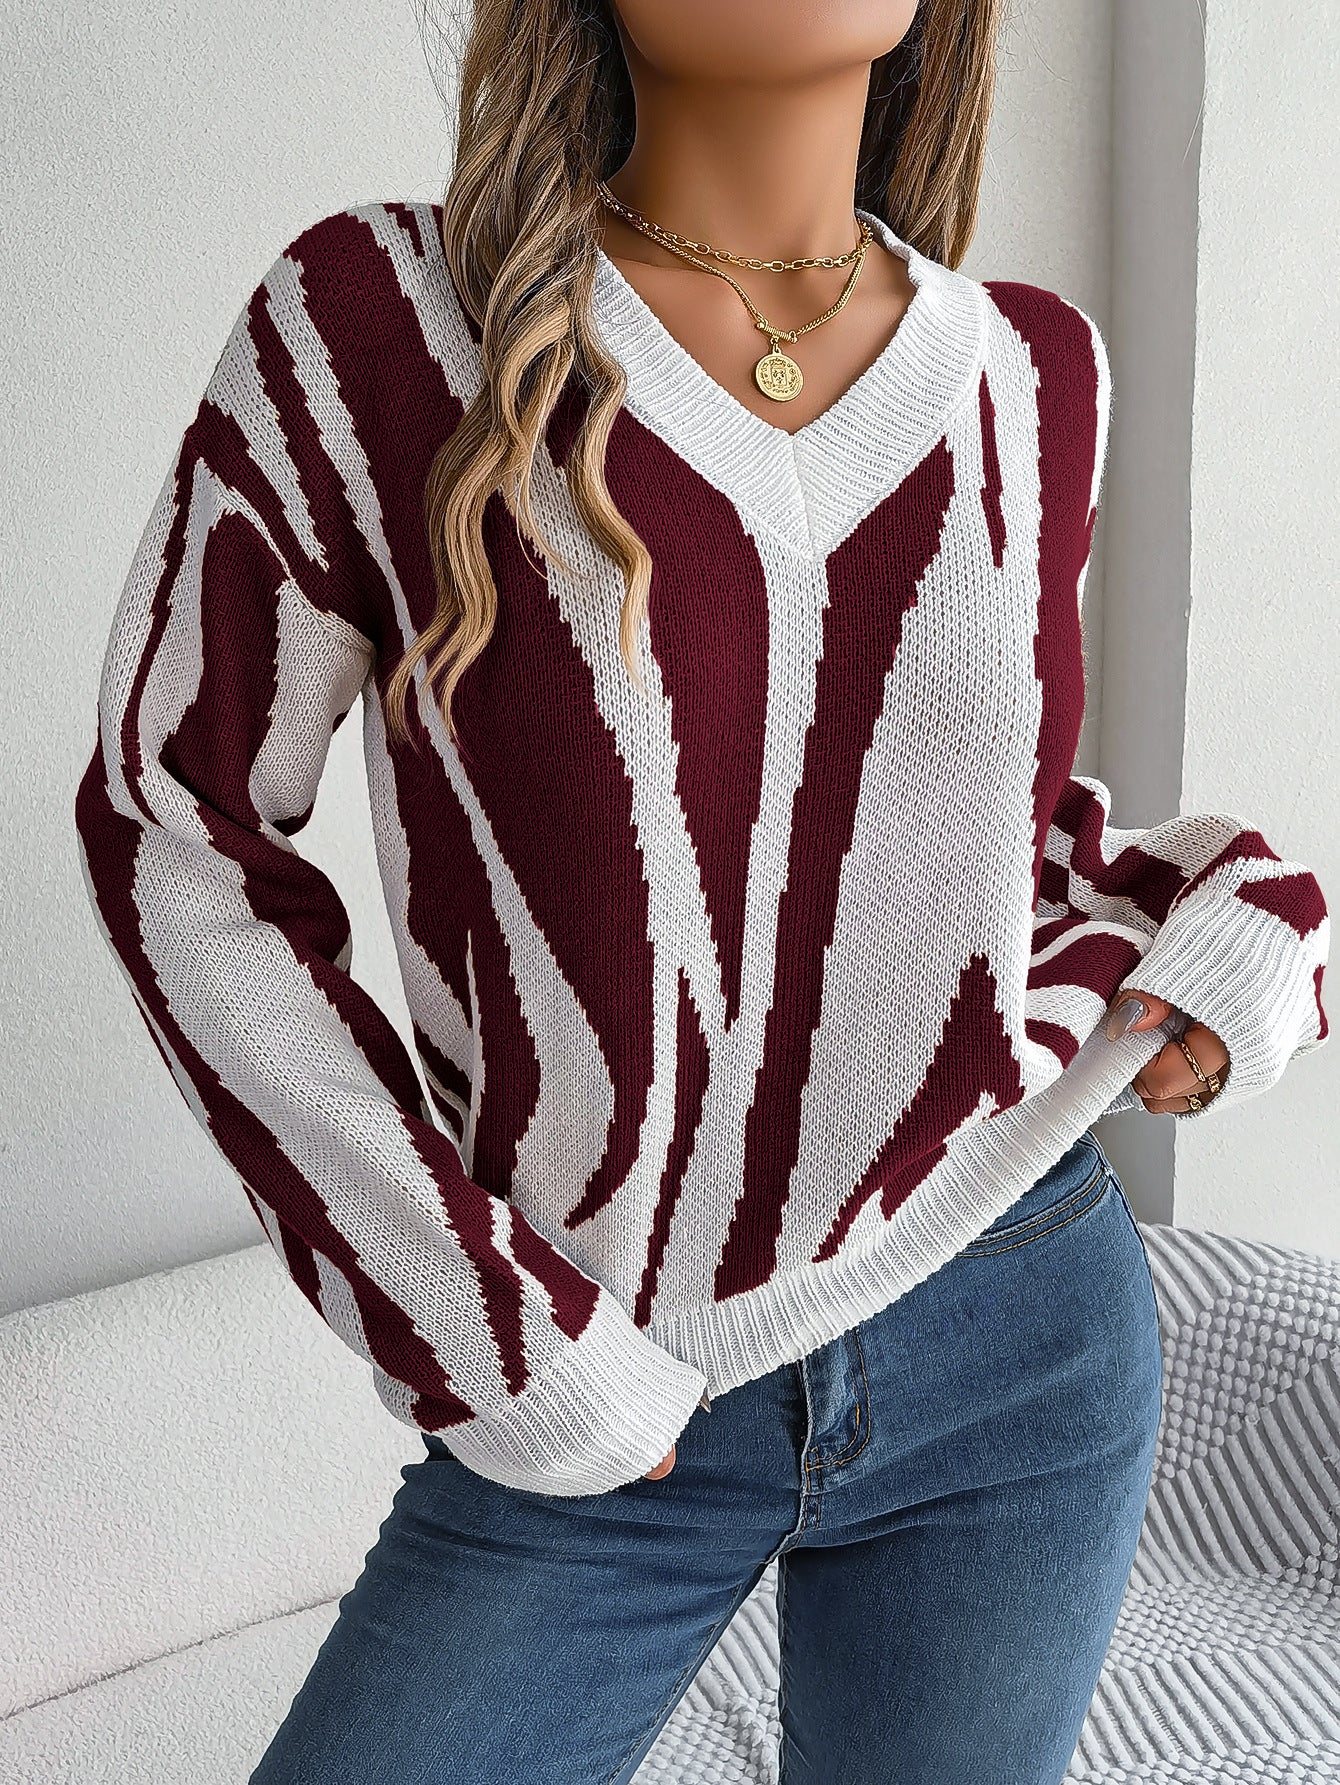 BamBam Autumn And Winter Casual V-Neck Contrast Color Long Sleeve Pullover Basic Sweater Women's Clothing - BamBam